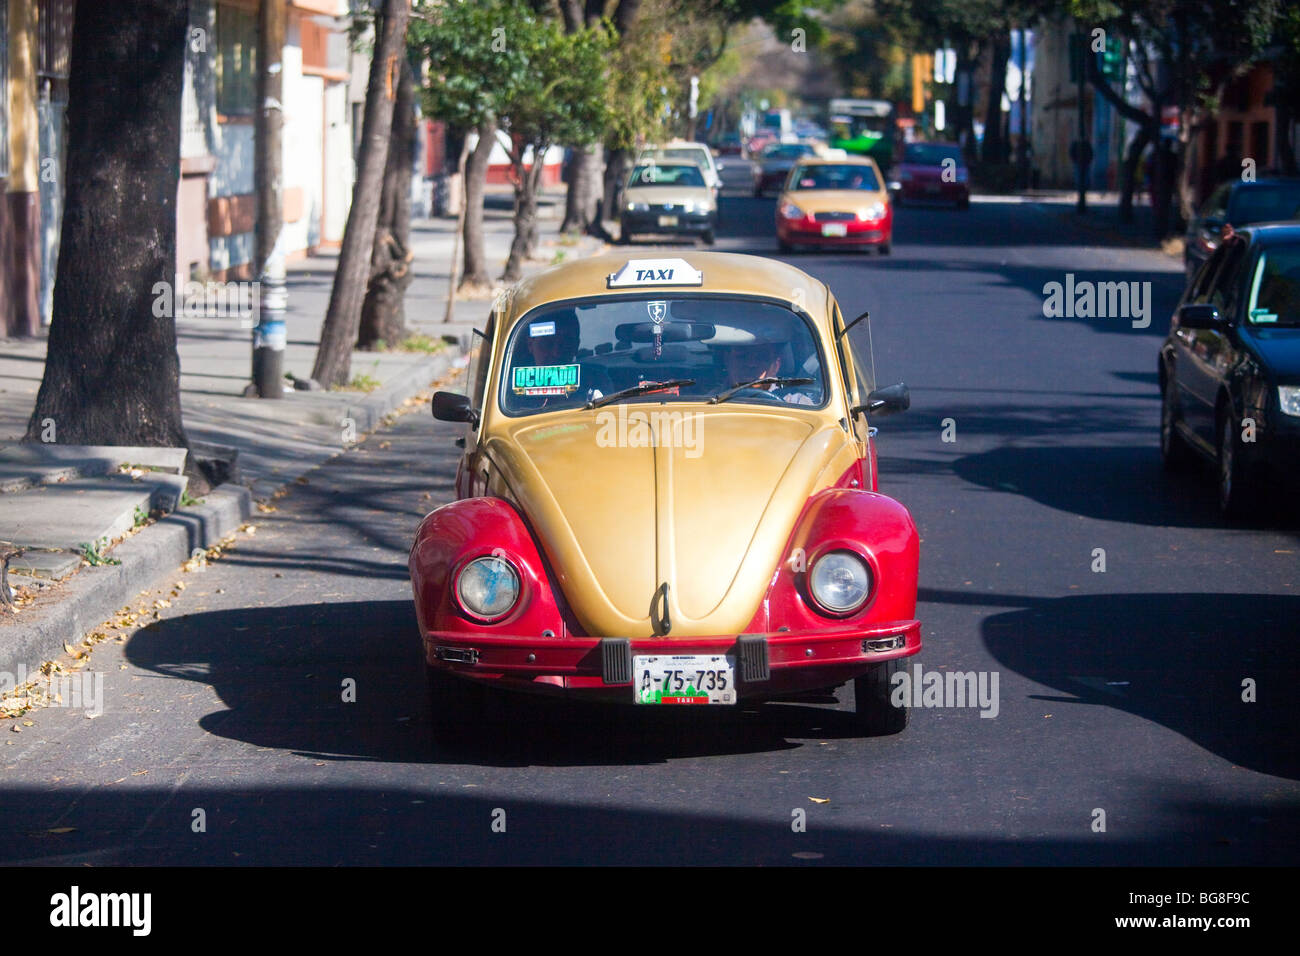 VW Taxi in Mexico City Stock Photo